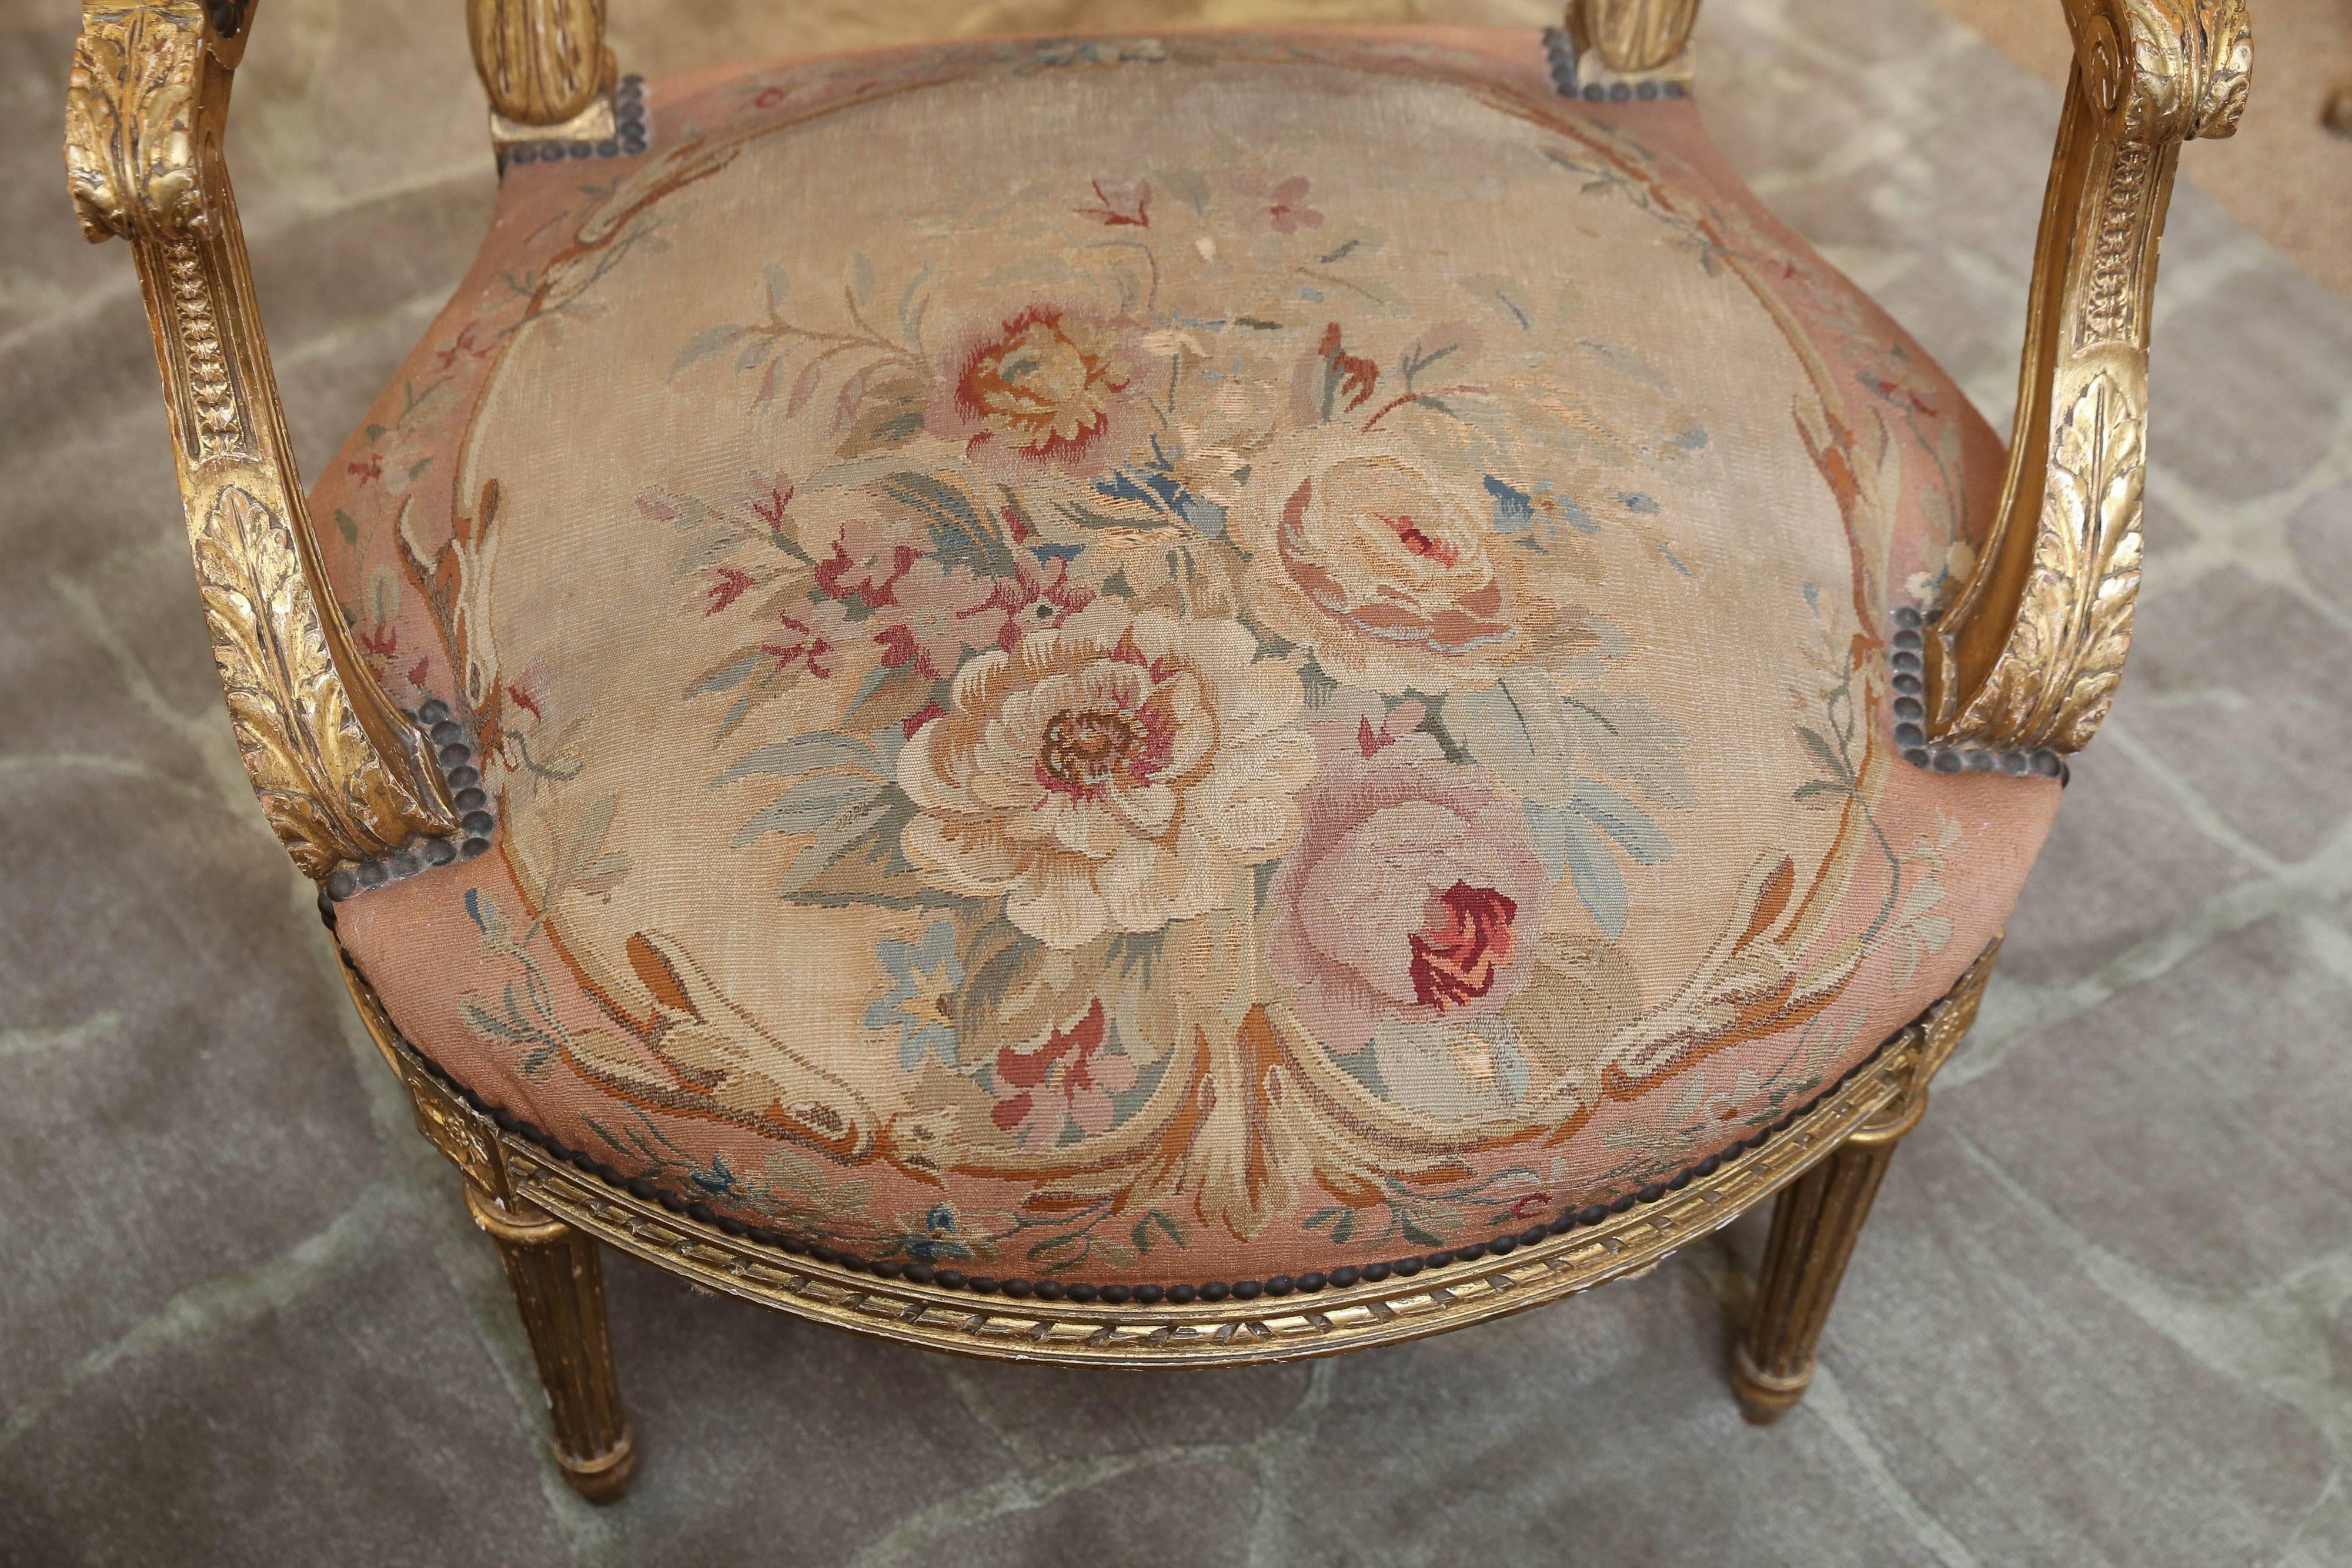 Pair of French Giltwood Louis XVI Chairs with Original Aubusson Upholstery 1